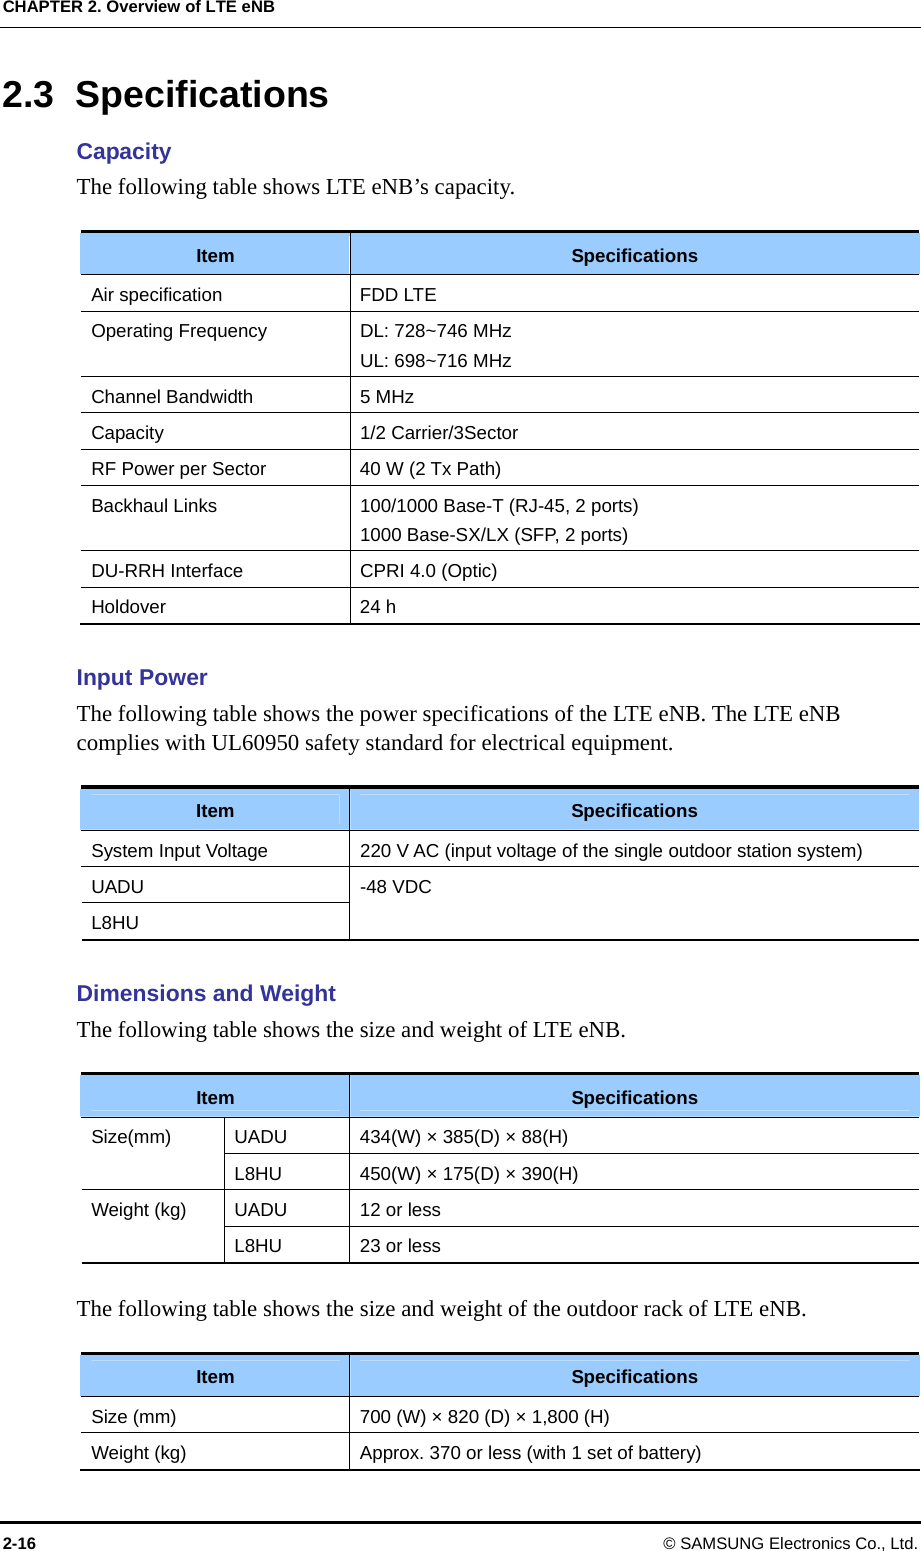 CHAPTER 2. Overview of LTE eNB 2.3 Specifications Capacity The following table shows LTE eNB’s capacity.  Item Specifications Air specification FDD LTE Operating Frequency DL: 728~746 MHz UL: 698~716 MHz Channel Bandwidth 5 MHz Capacity 1/2 Carrier/3Sector   RF Power per Sector   40 W (2 Tx Path) Backhaul Links    100/1000 Base-T (RJ-45, 2 ports) 1000 Base-SX/LX (SFP, 2 ports) DU-RRH Interface CPRI 4.0 (Optic) Holdover 24 h  Input Power The following table shows the power specifications of the LTE eNB. The LTE eNB complies with UL60950 safety standard for electrical equipment.  Item Specifications System Input Voltage 220 V AC (input voltage of the single outdoor station system) UADU L8HU -48 VDC  Dimensions and Weight The following table shows the size and weight of LTE eNB.  Item Specifications UADU 434(W) × 385(D) × 88(H) Size(mm) L8HU  450(W) × 175(D) × 390(H) UADU    12 or less Weight (kg) L8HU  23 or less  The following table shows the size and weight of the outdoor rack of LTE eNB.  Item Specifications Size (mm) 700 (W) × 820 (D) × 1,800 (H) Weight (kg) Approx. 370 or less (with 1 set of battery) 2-16 © SAMSUNG Electronics Co., Ltd. 